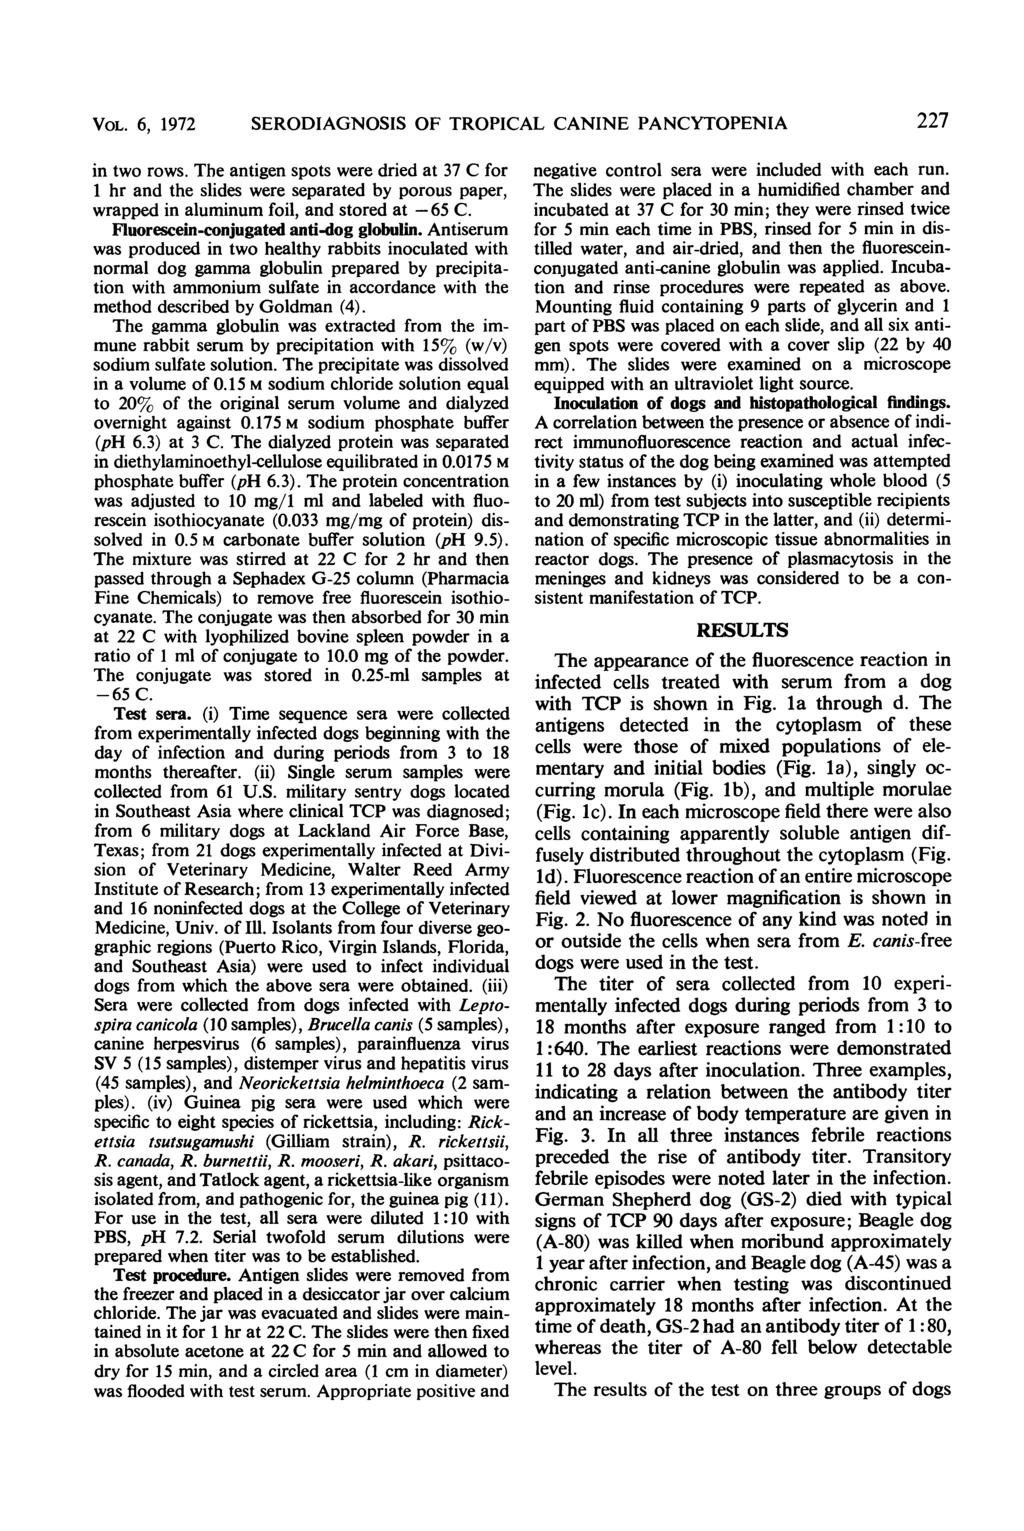 VOL. 6, 1972 SERODIAGNOSIS OF TROPICAL CANINE PANCYTOPENIA 227 in two rows.